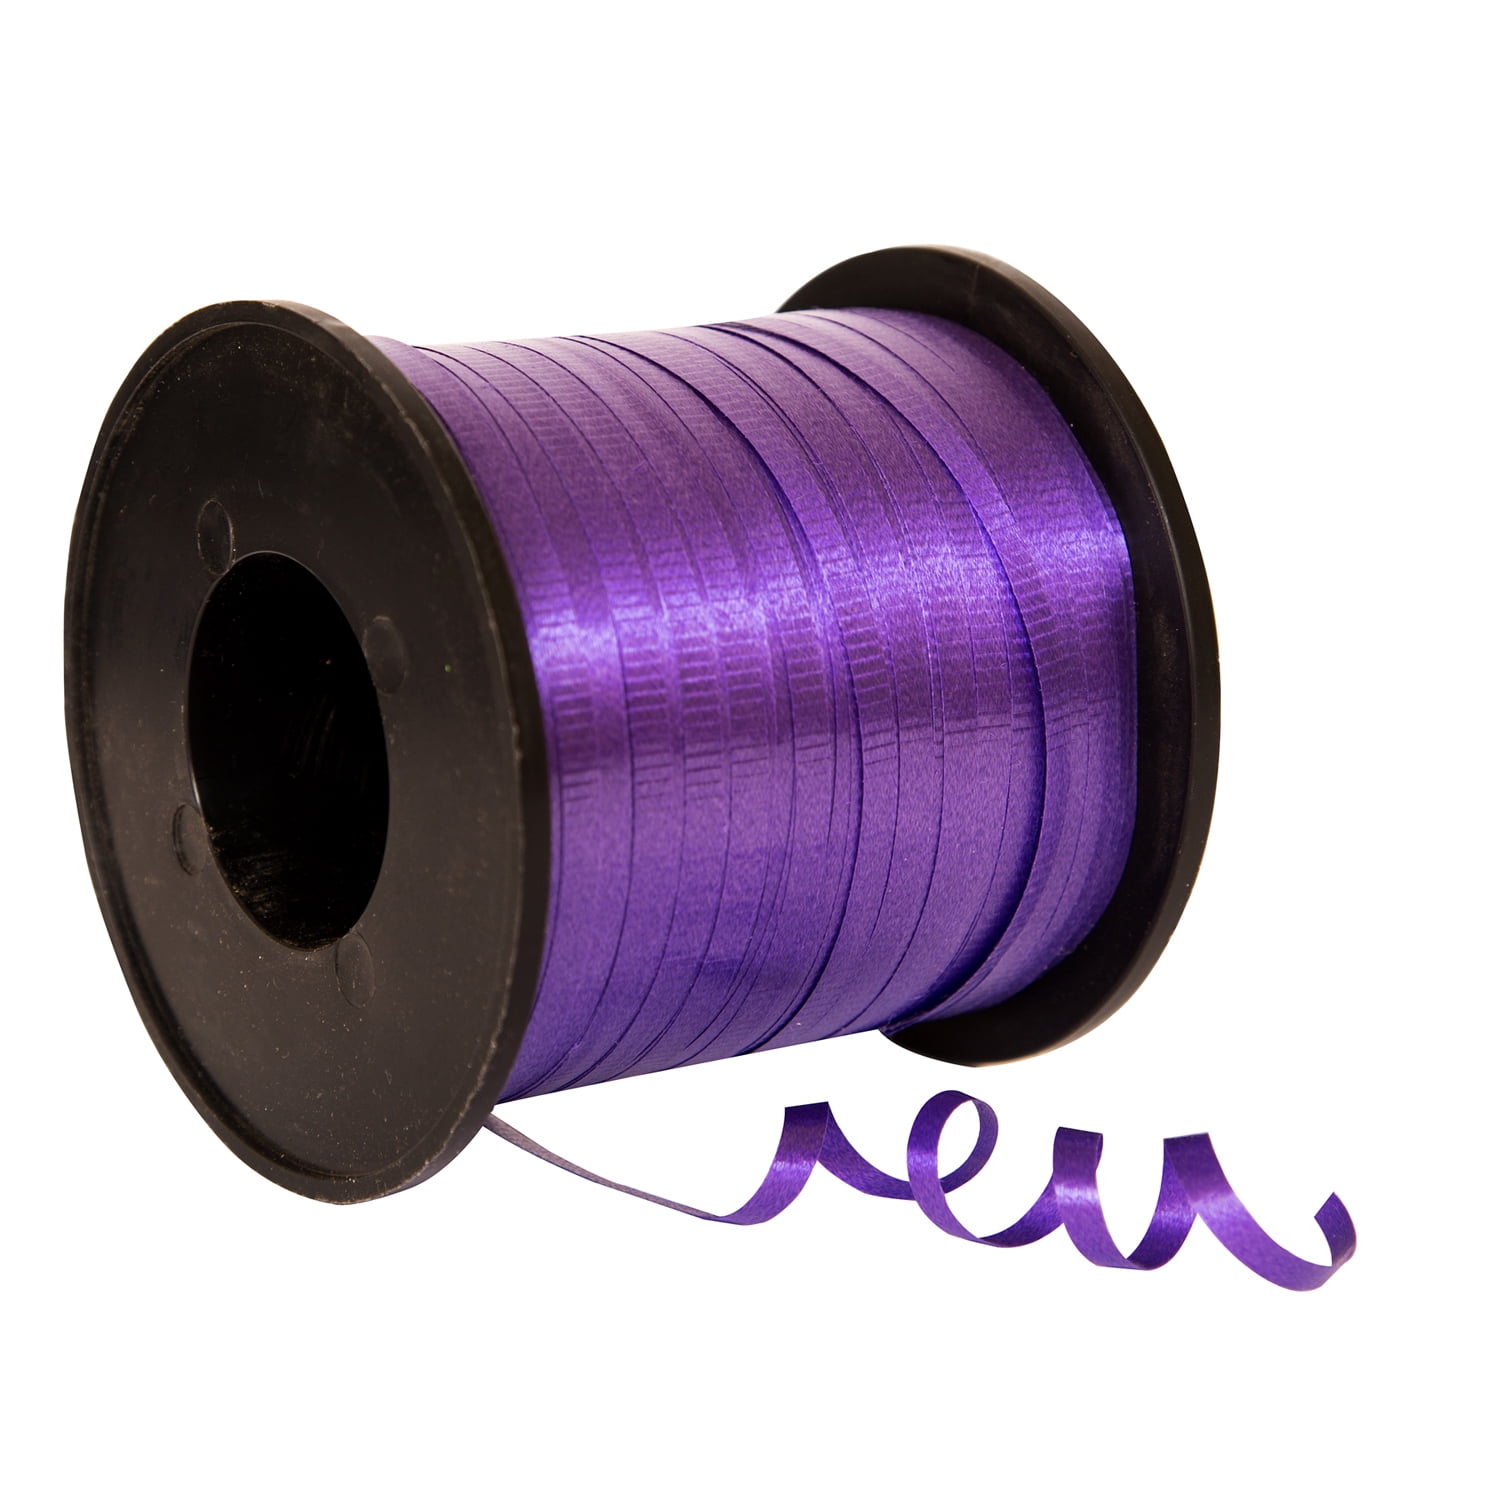 Curling Ribbon 1500 ft roll of LAVENDER Ribbon ~use with balloons or to decorate 